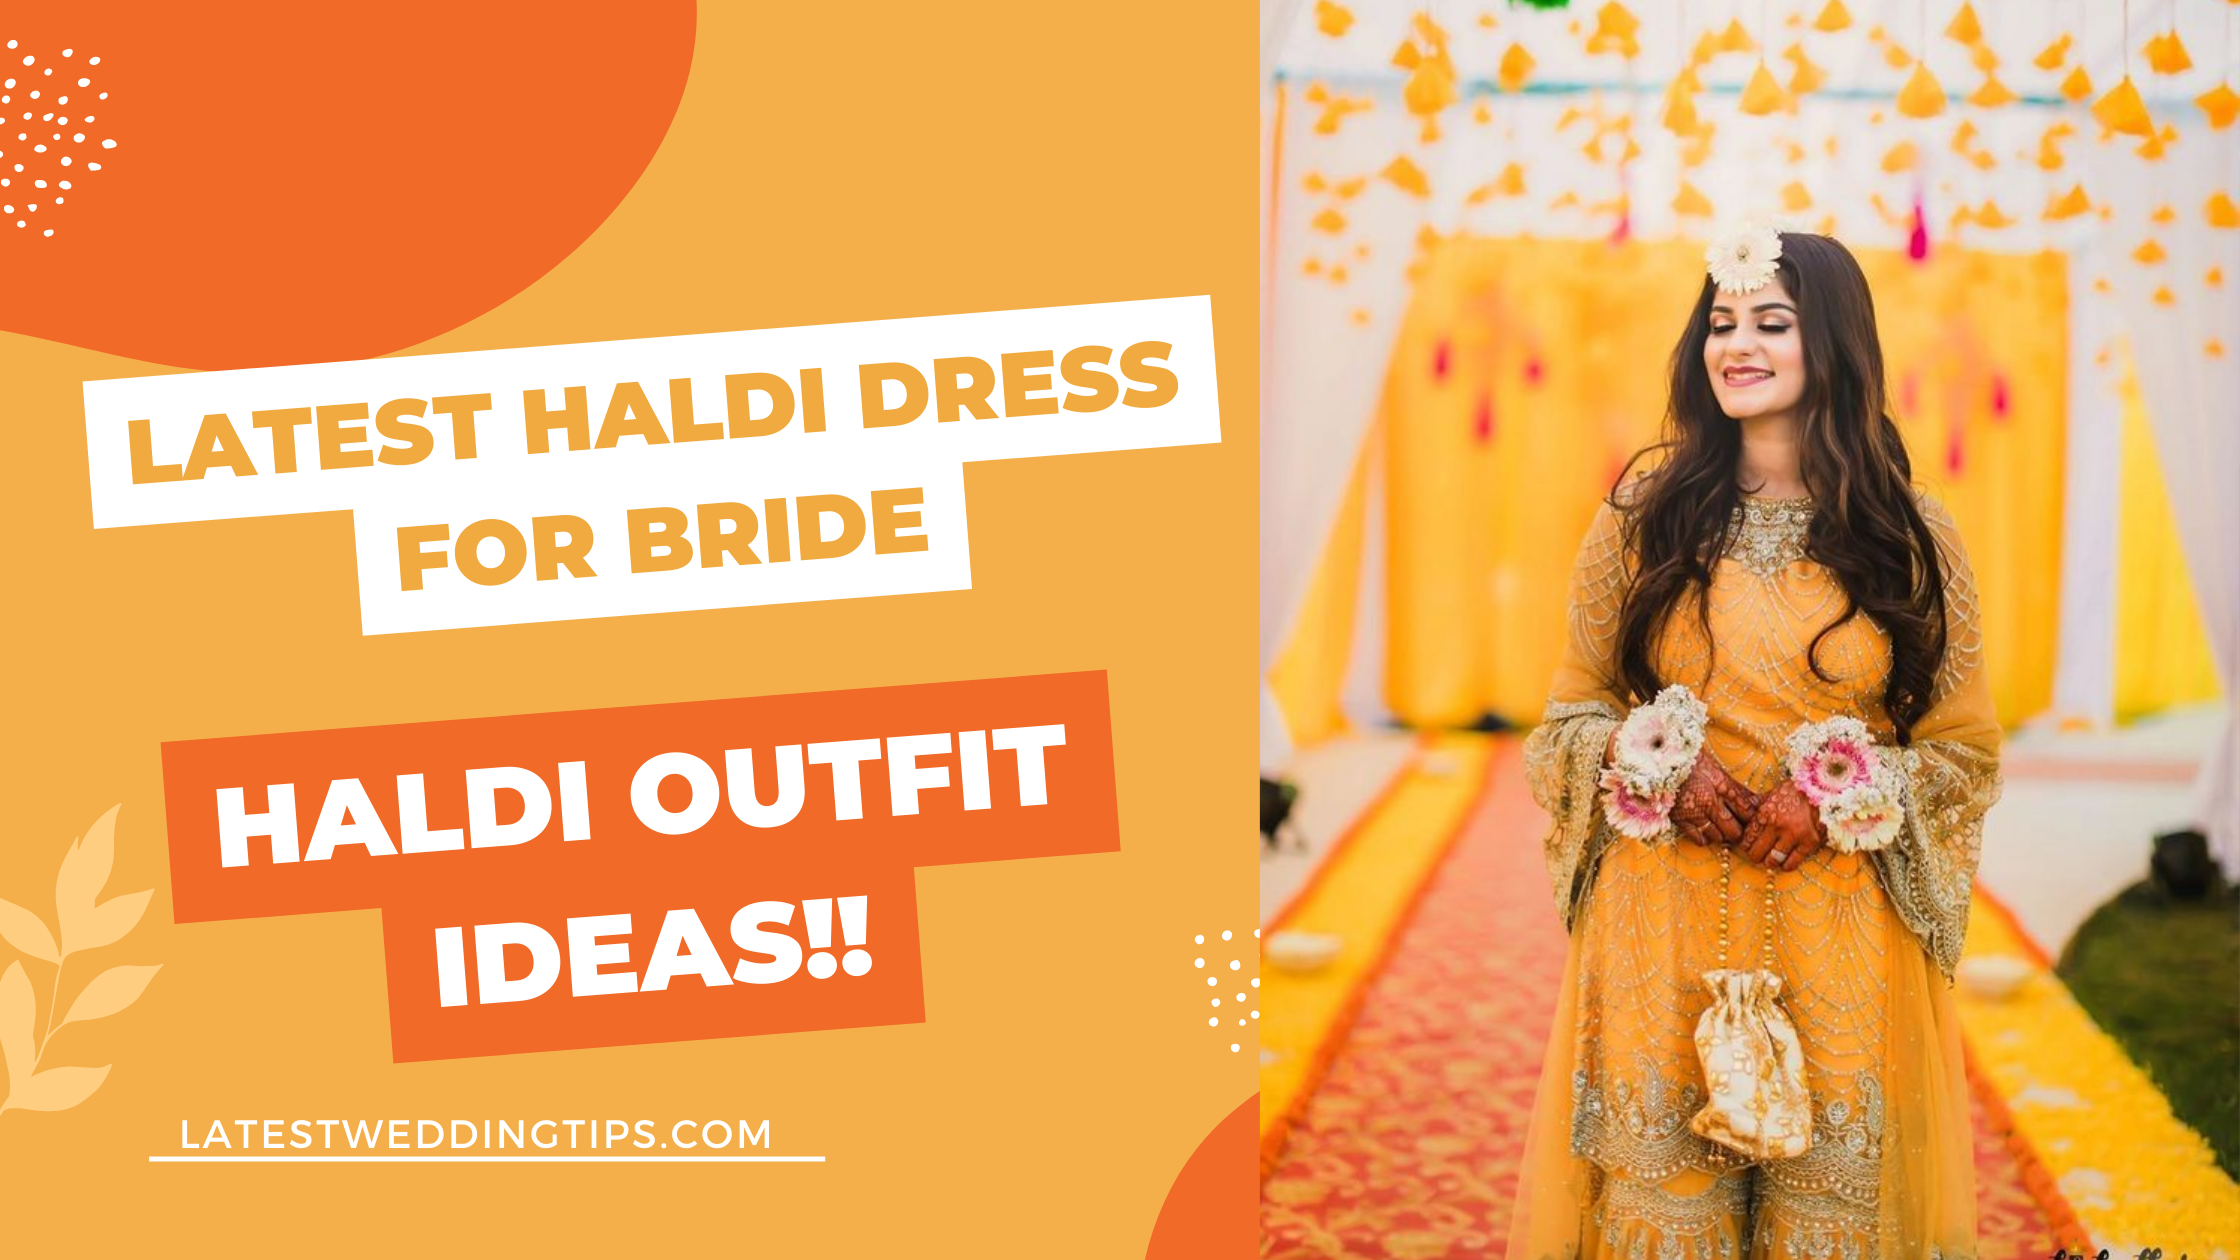 15 Best Haldi Outfits To Inspire You